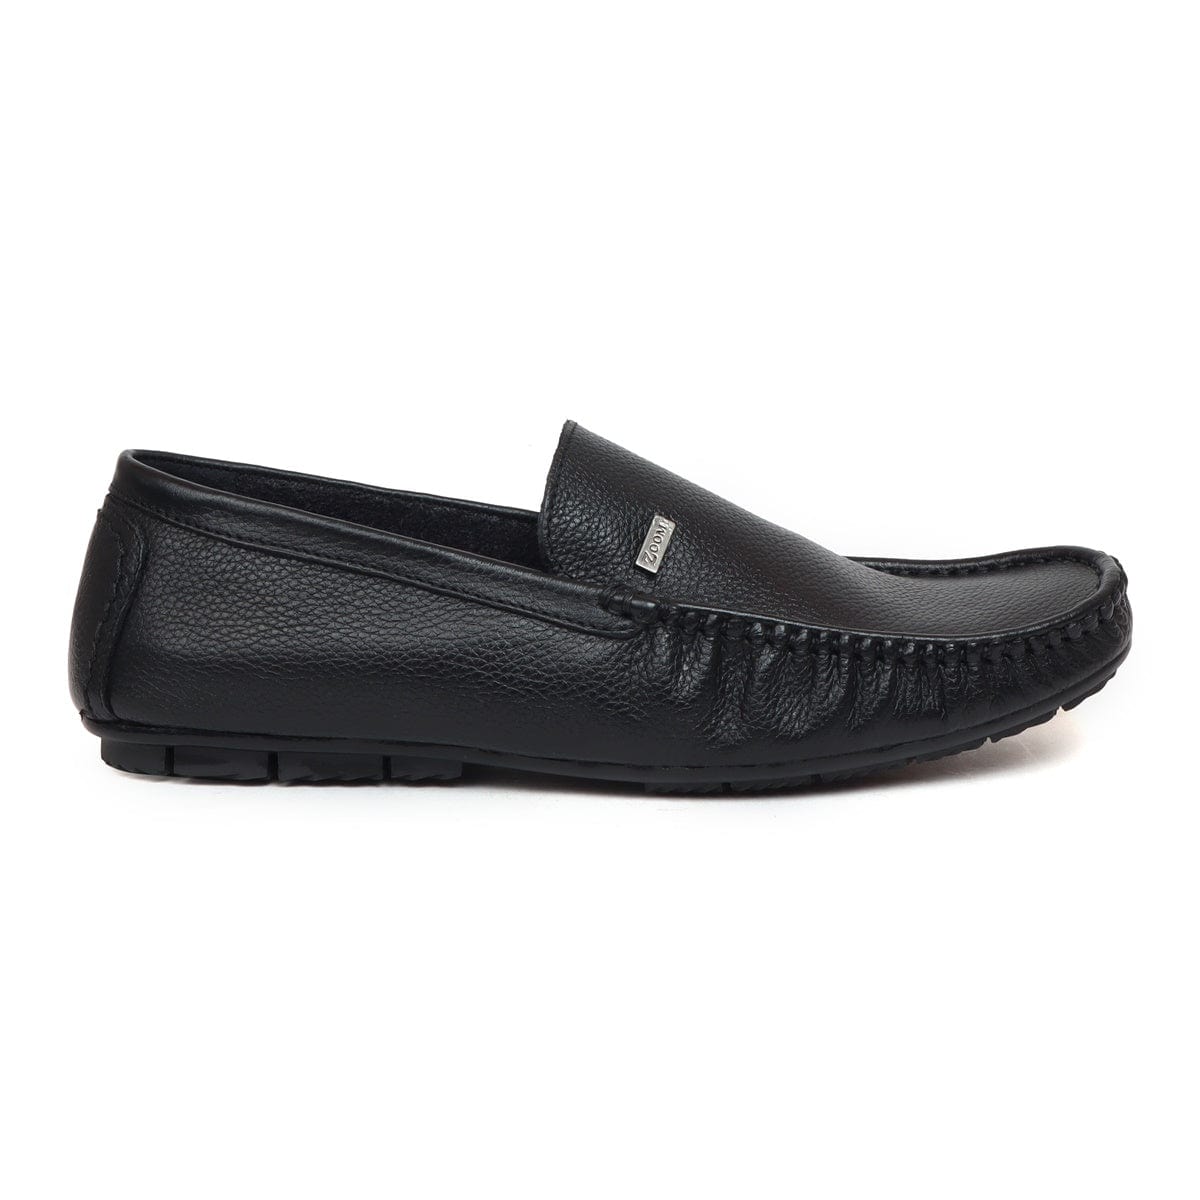 casual black loafers for men bt-16_2